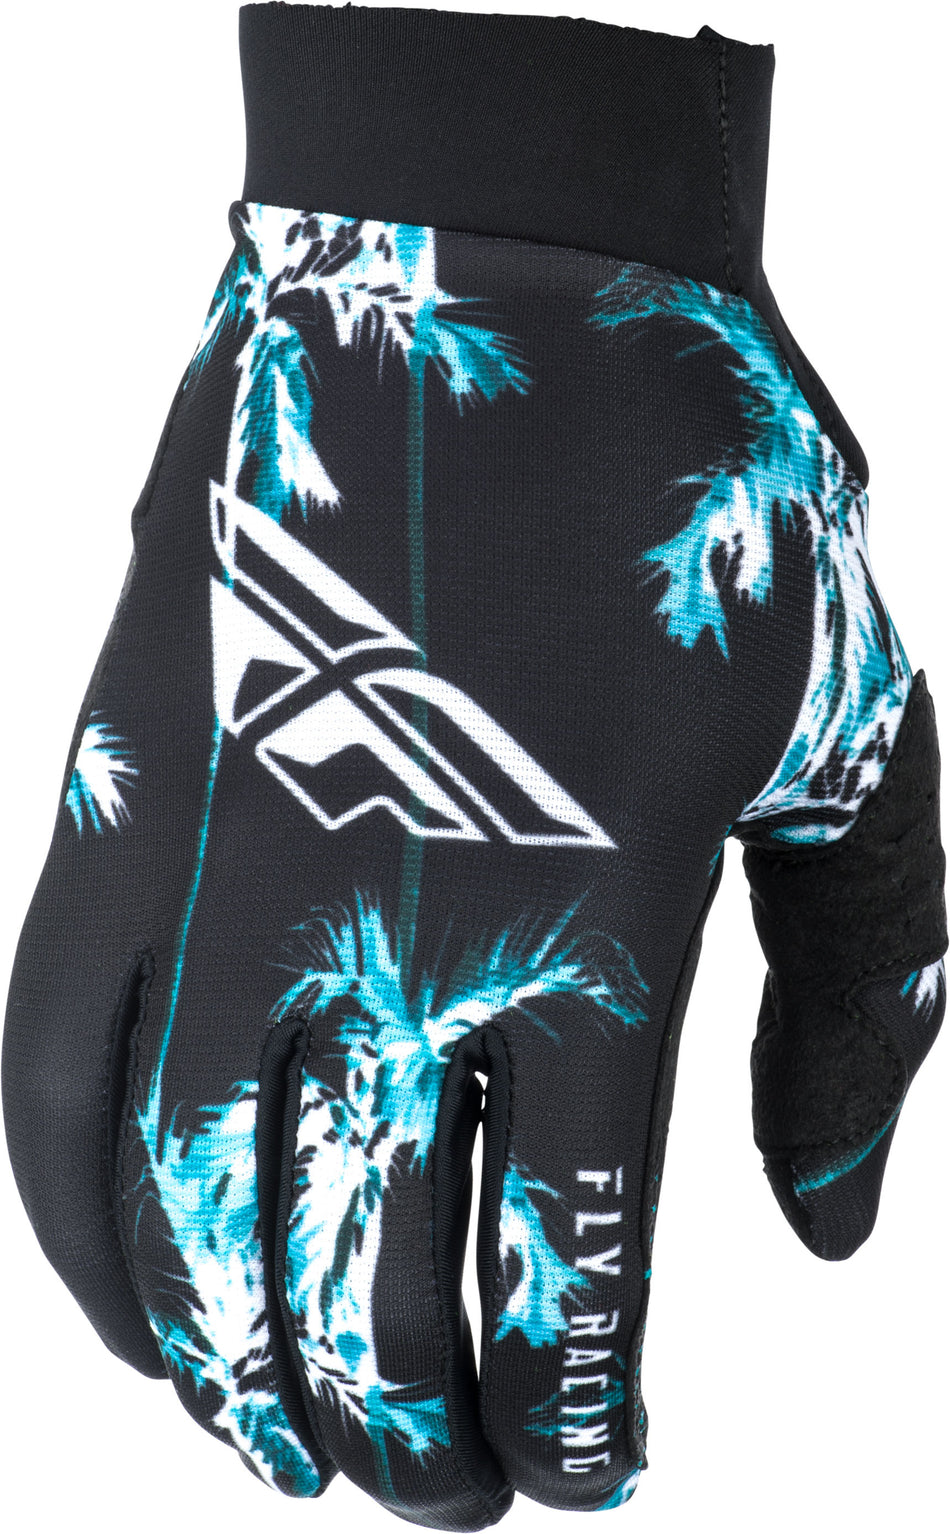 FLY RACING Pro Lite Paradise Gloves Teal/Black Sz 12 372-81912